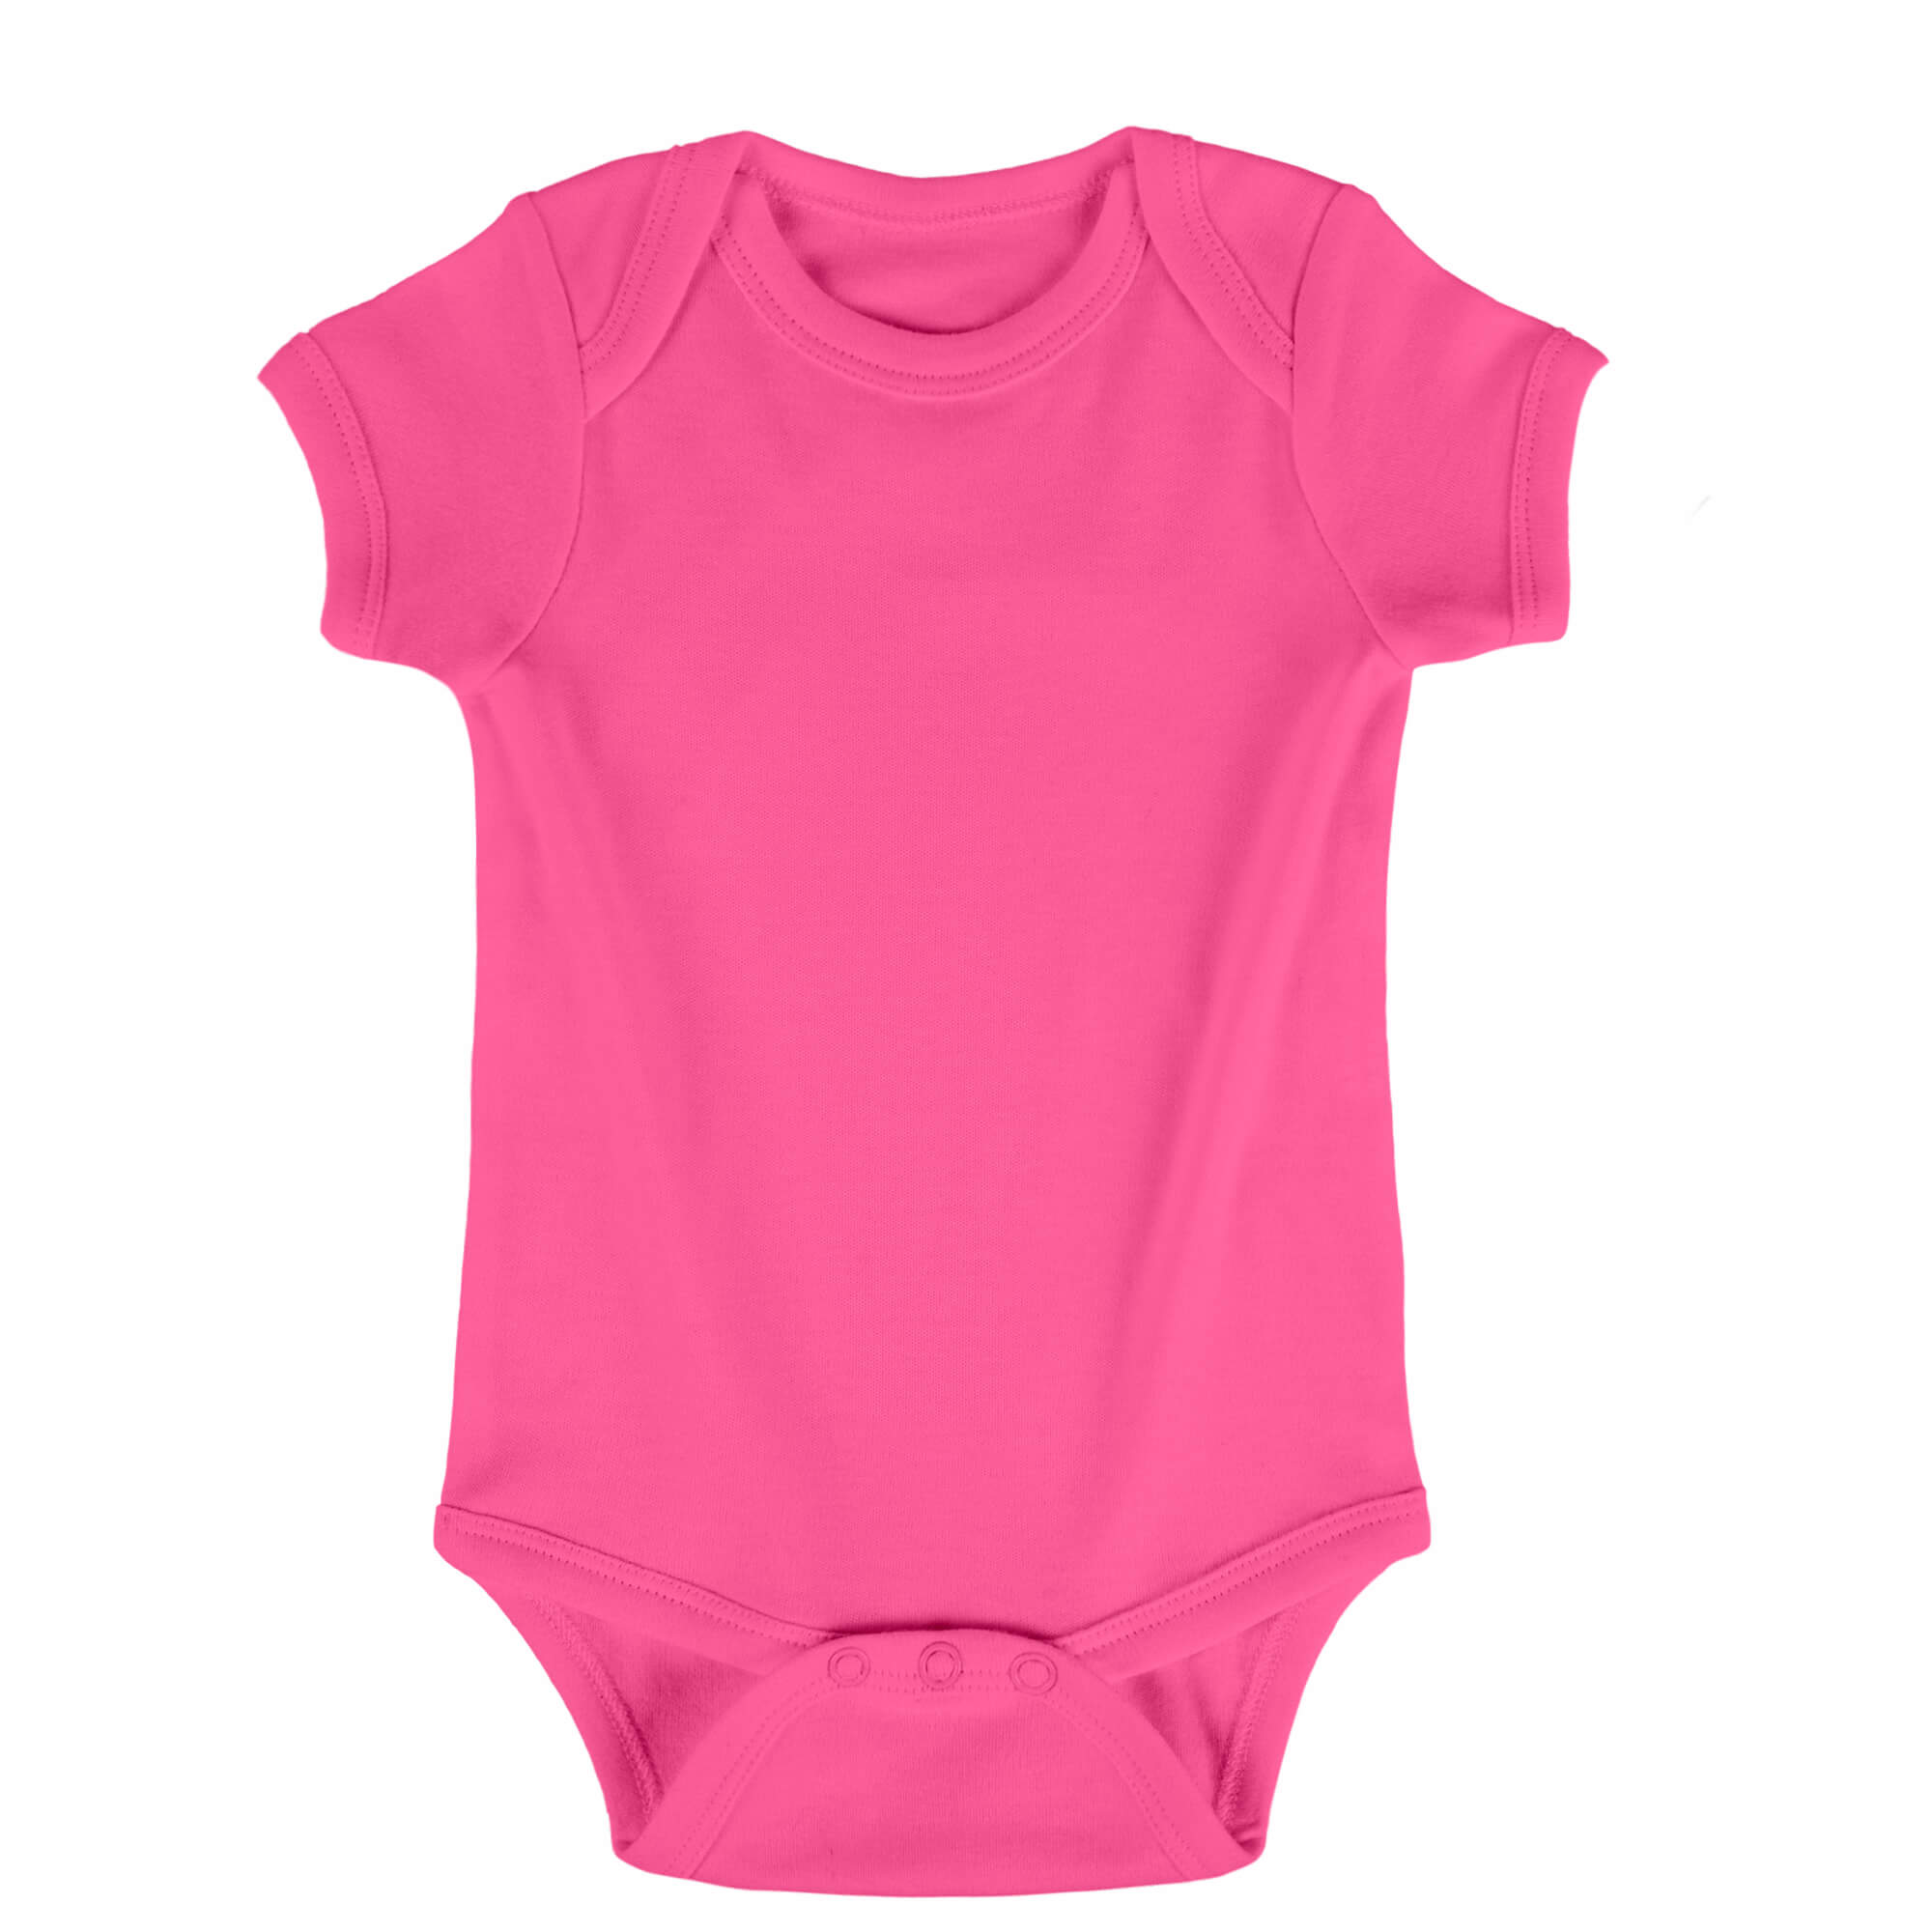 plum red color number #16, onesie color selection, and color display.